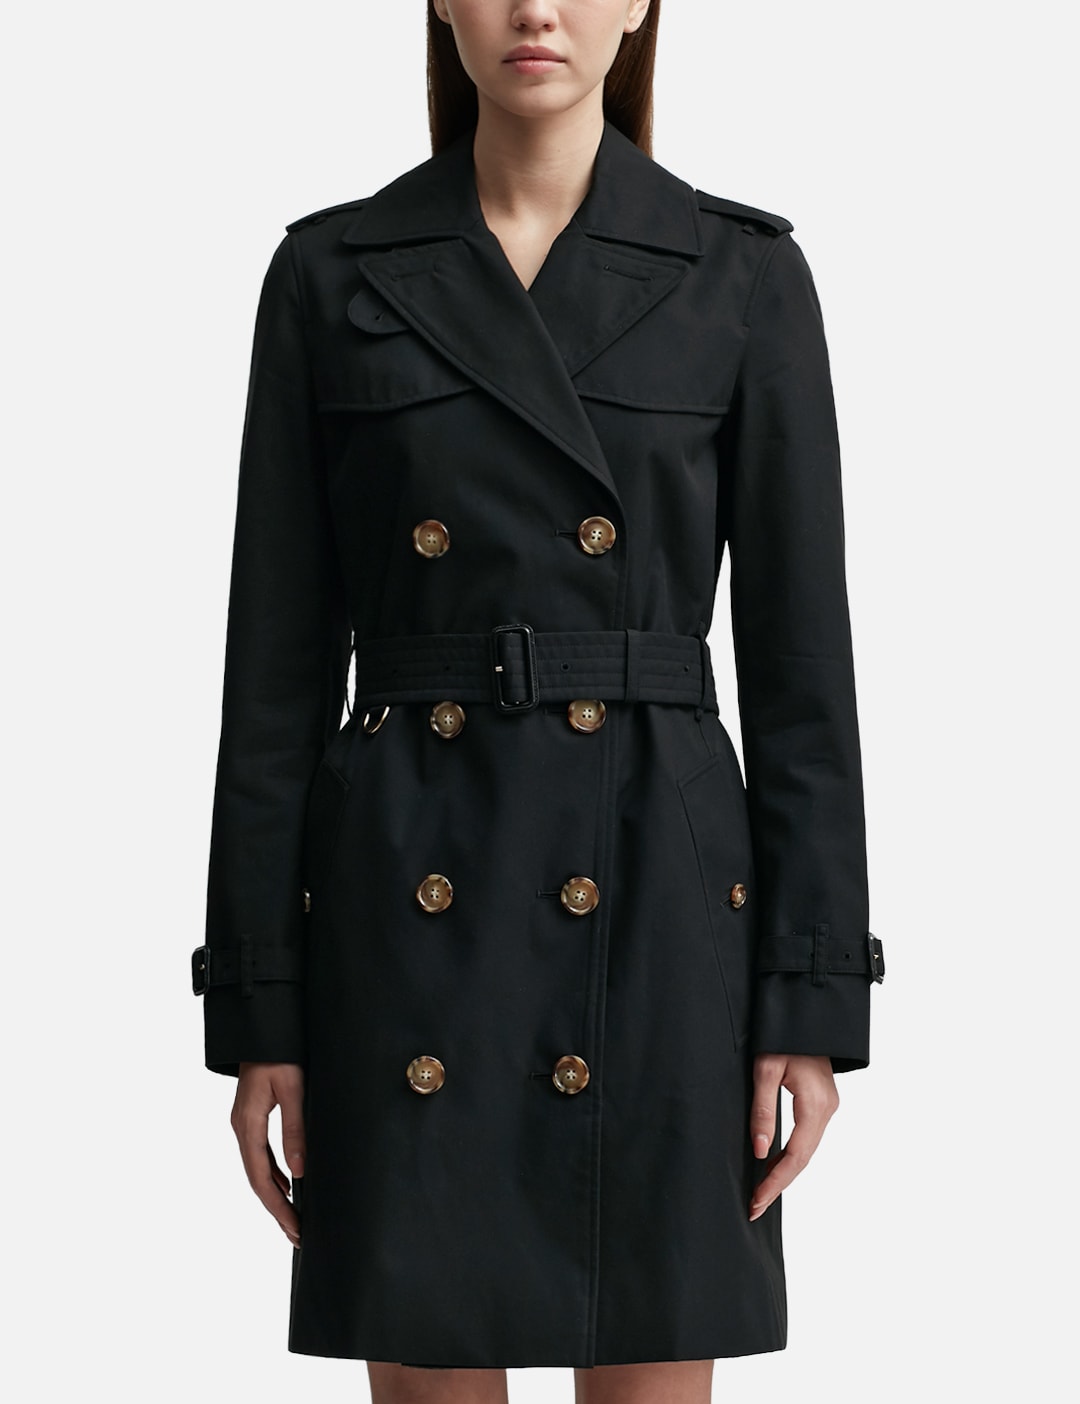 Burberry - The Short Islington Trench Coat | HBX - Globally Curated ...